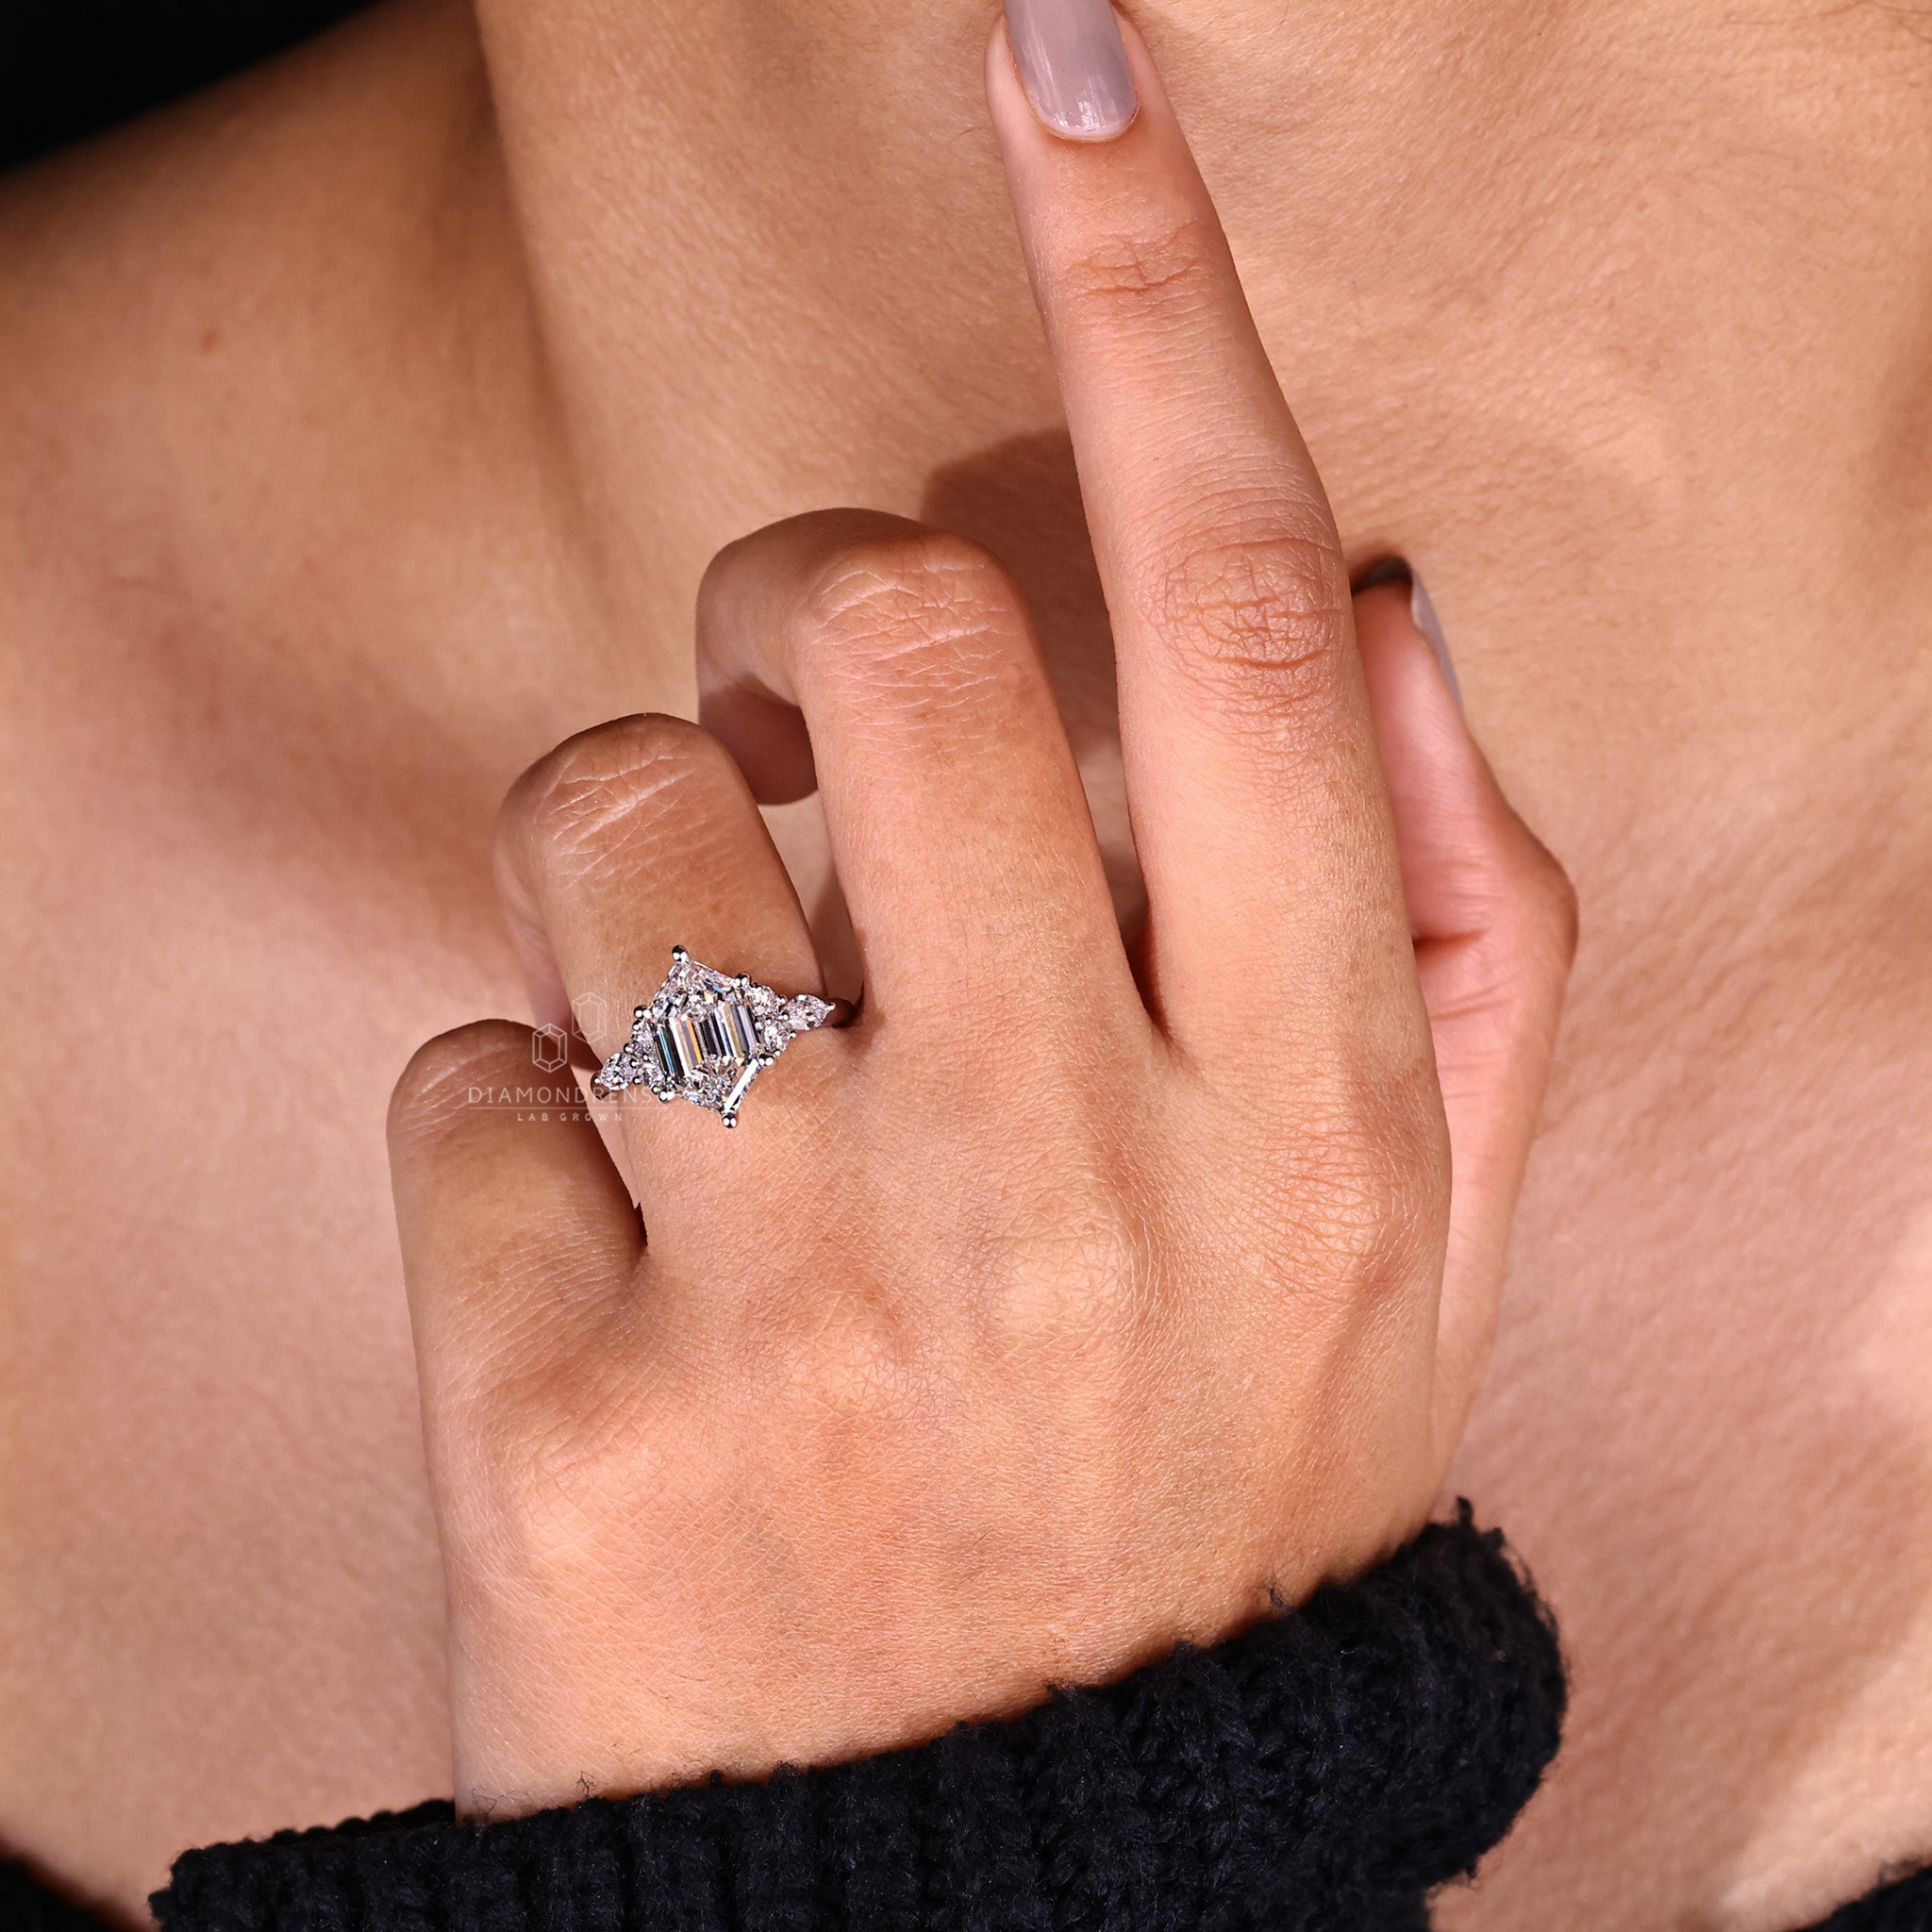 A stylish 6-prong engagement ring adorned with a step-cut hexagon diamond, representing timeless elegance and romance.